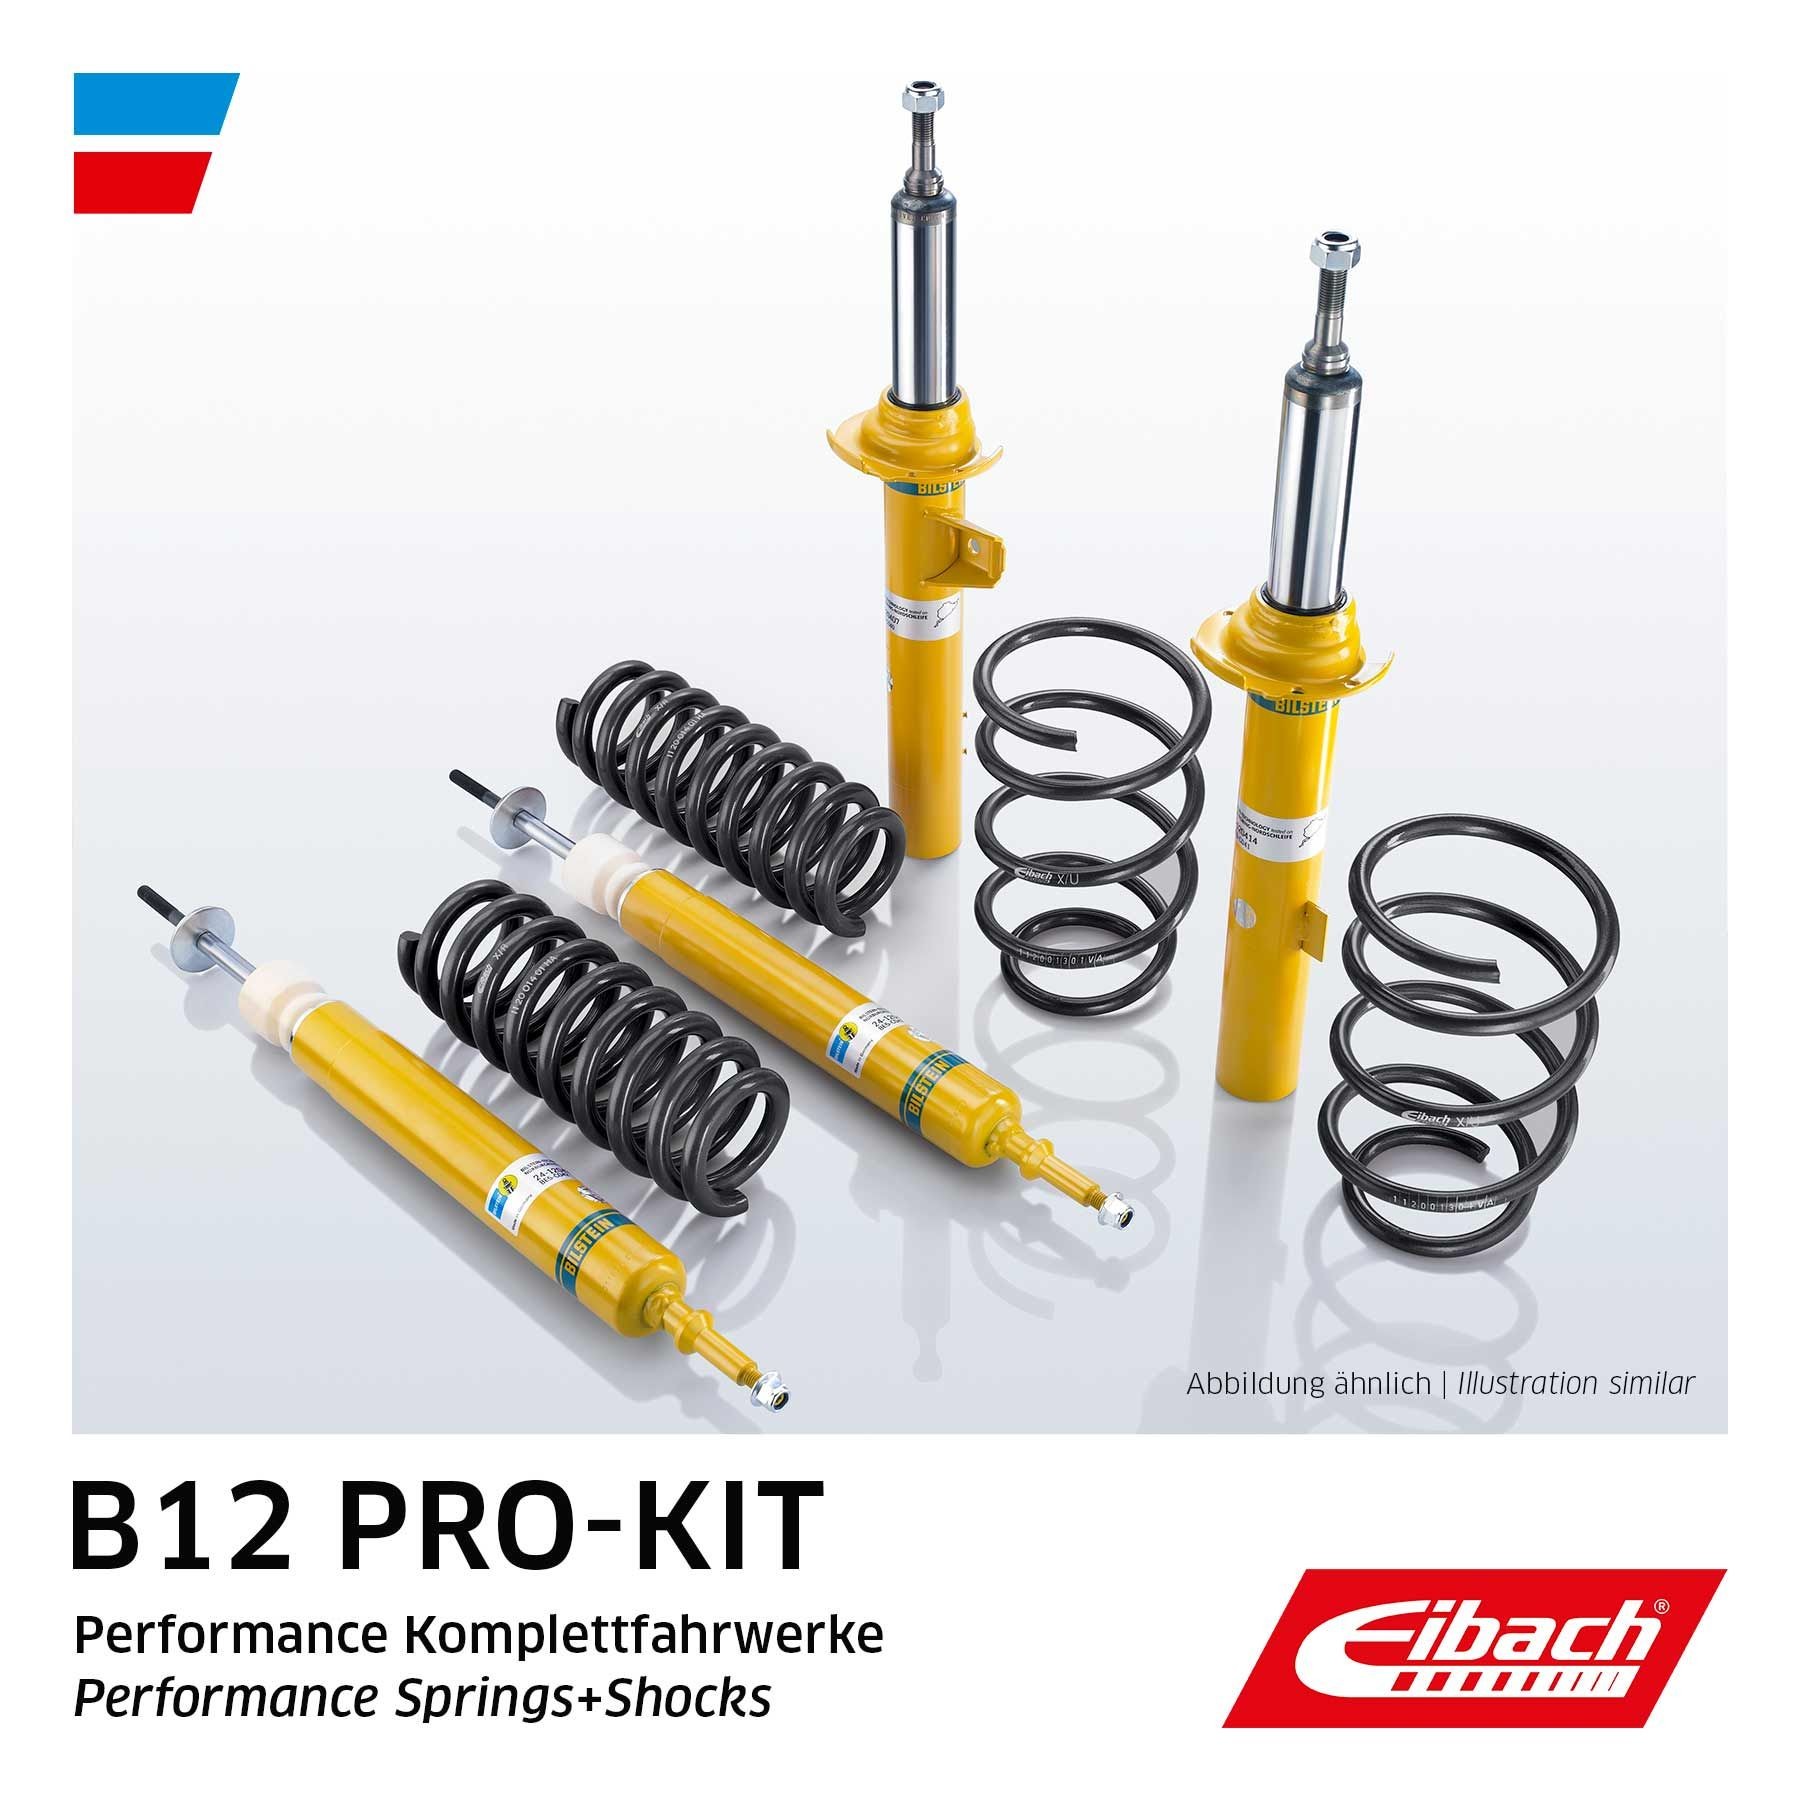 EIBACH Suspension kit, coil springs / shock absorbers VW Golf III Estate (1H5) new E90-15-021-16-22